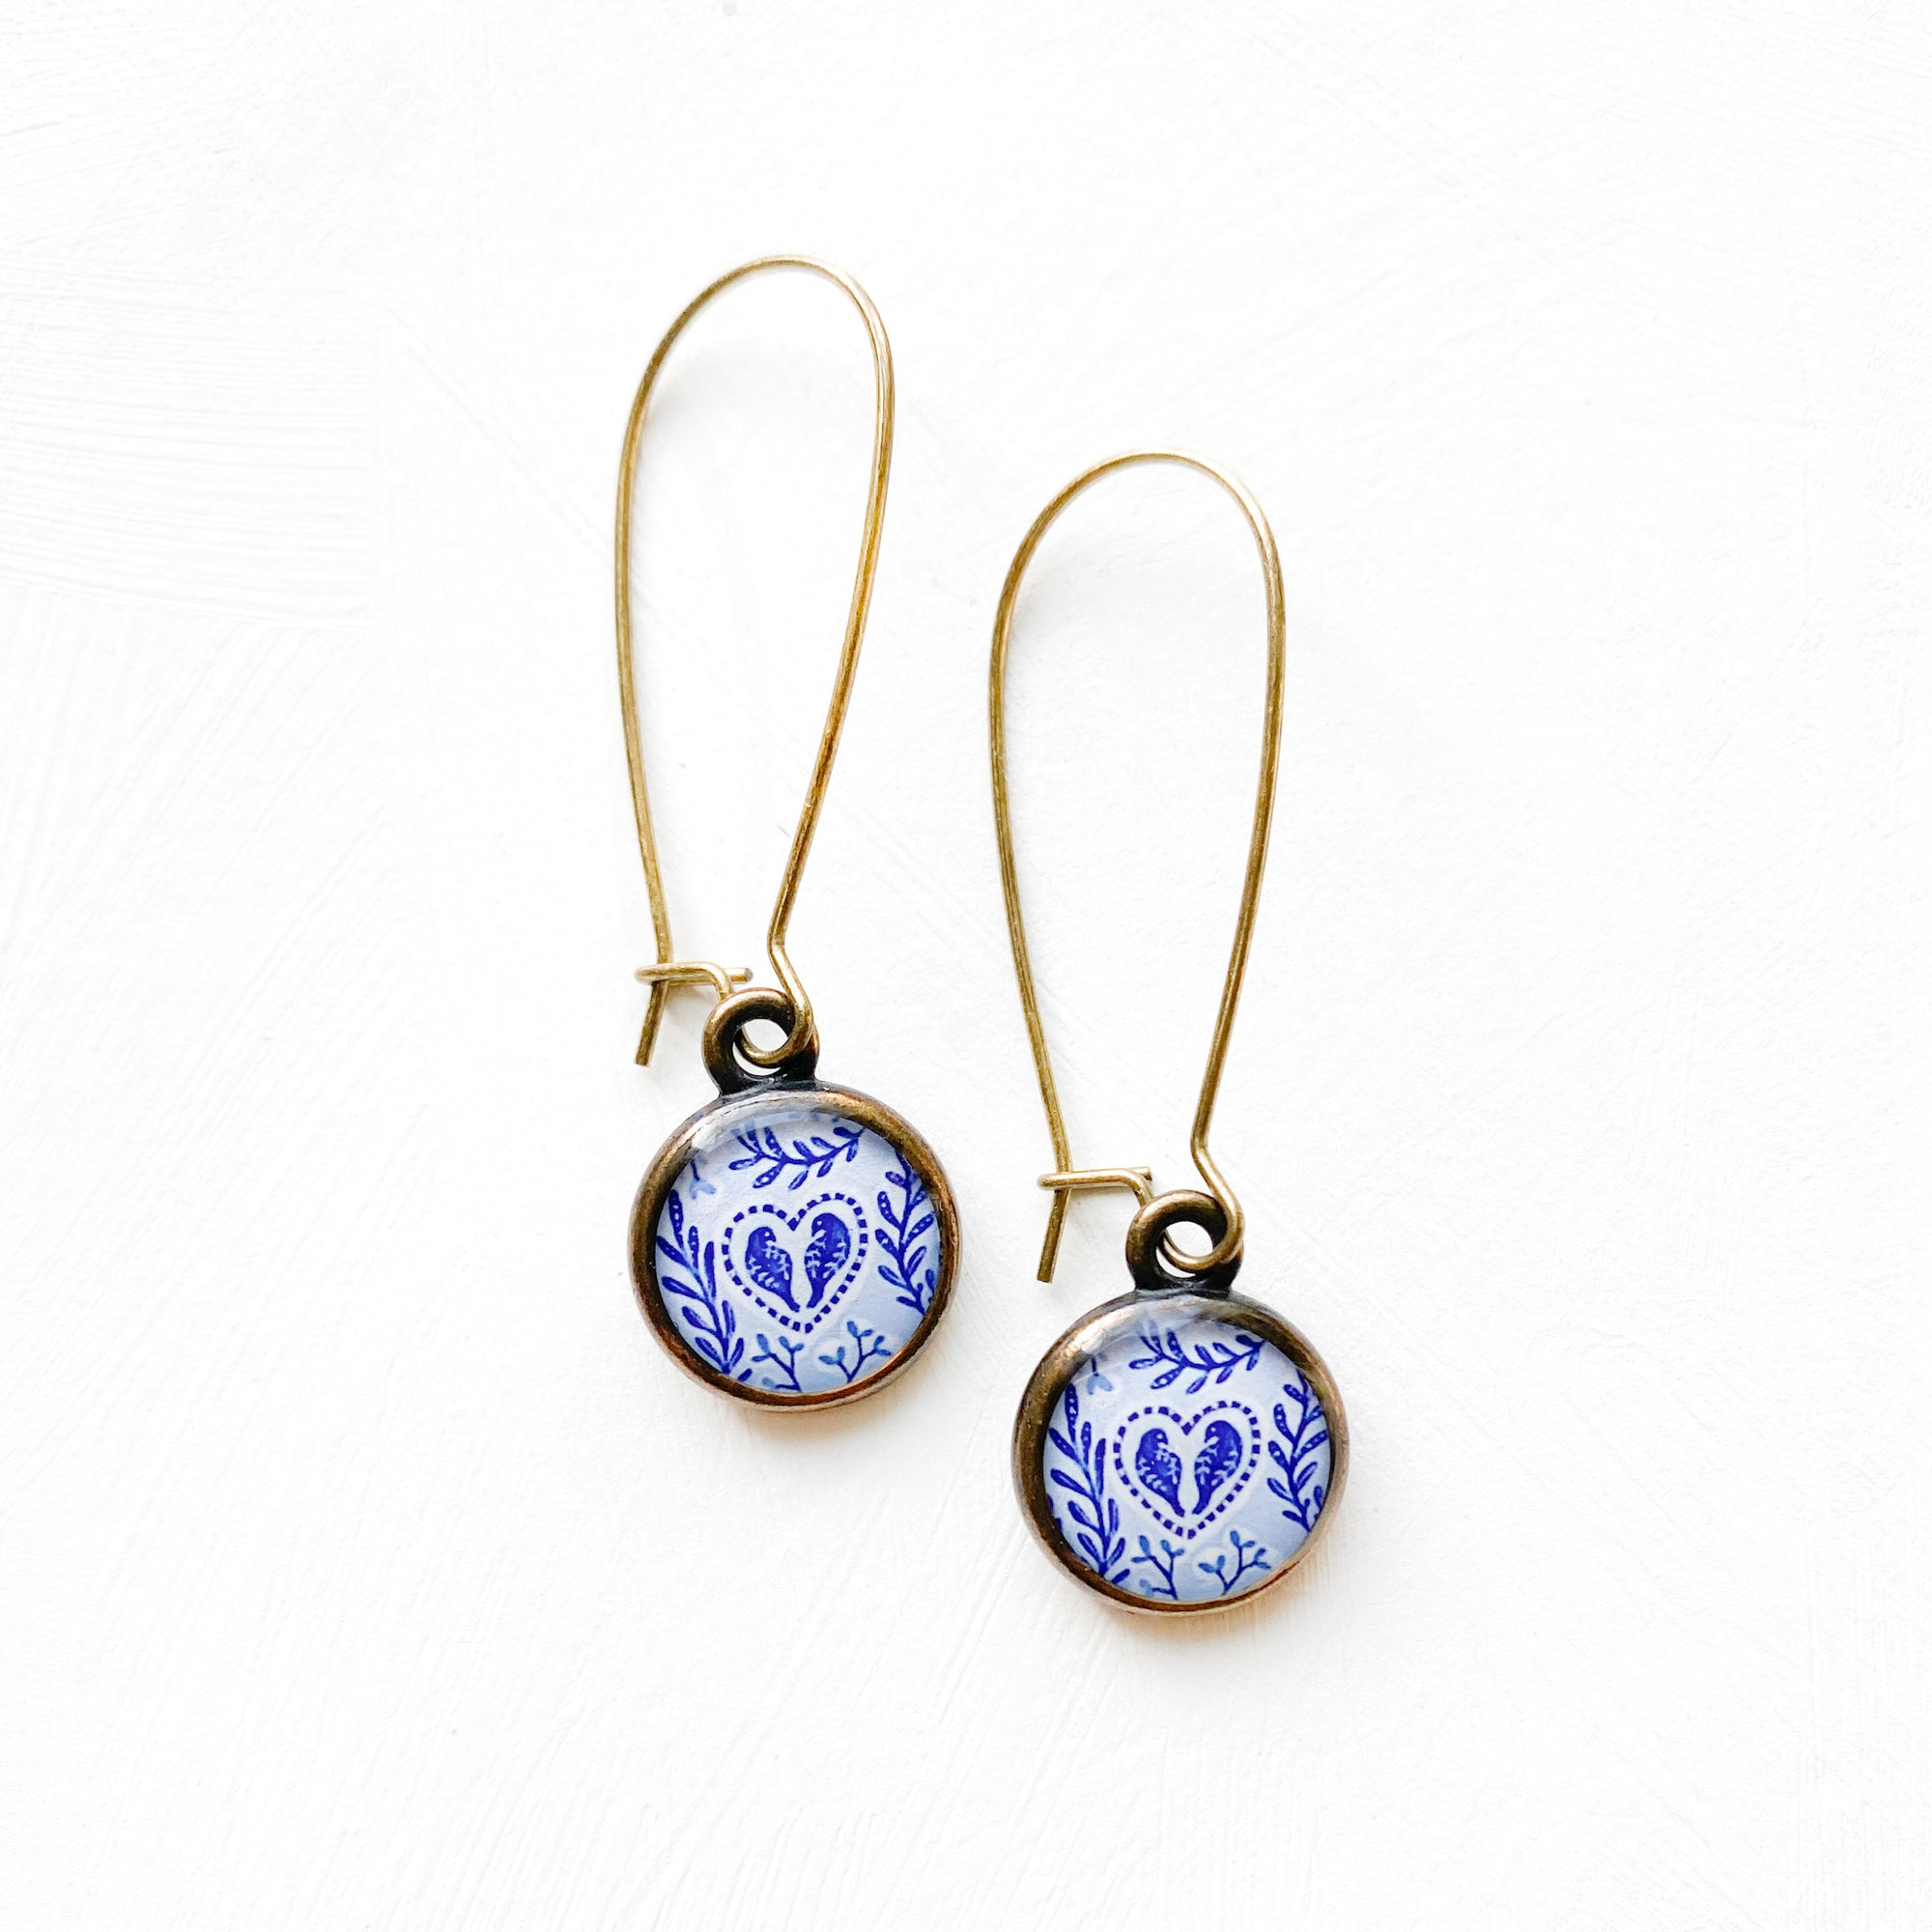 a pair of earrings with blue and white designs